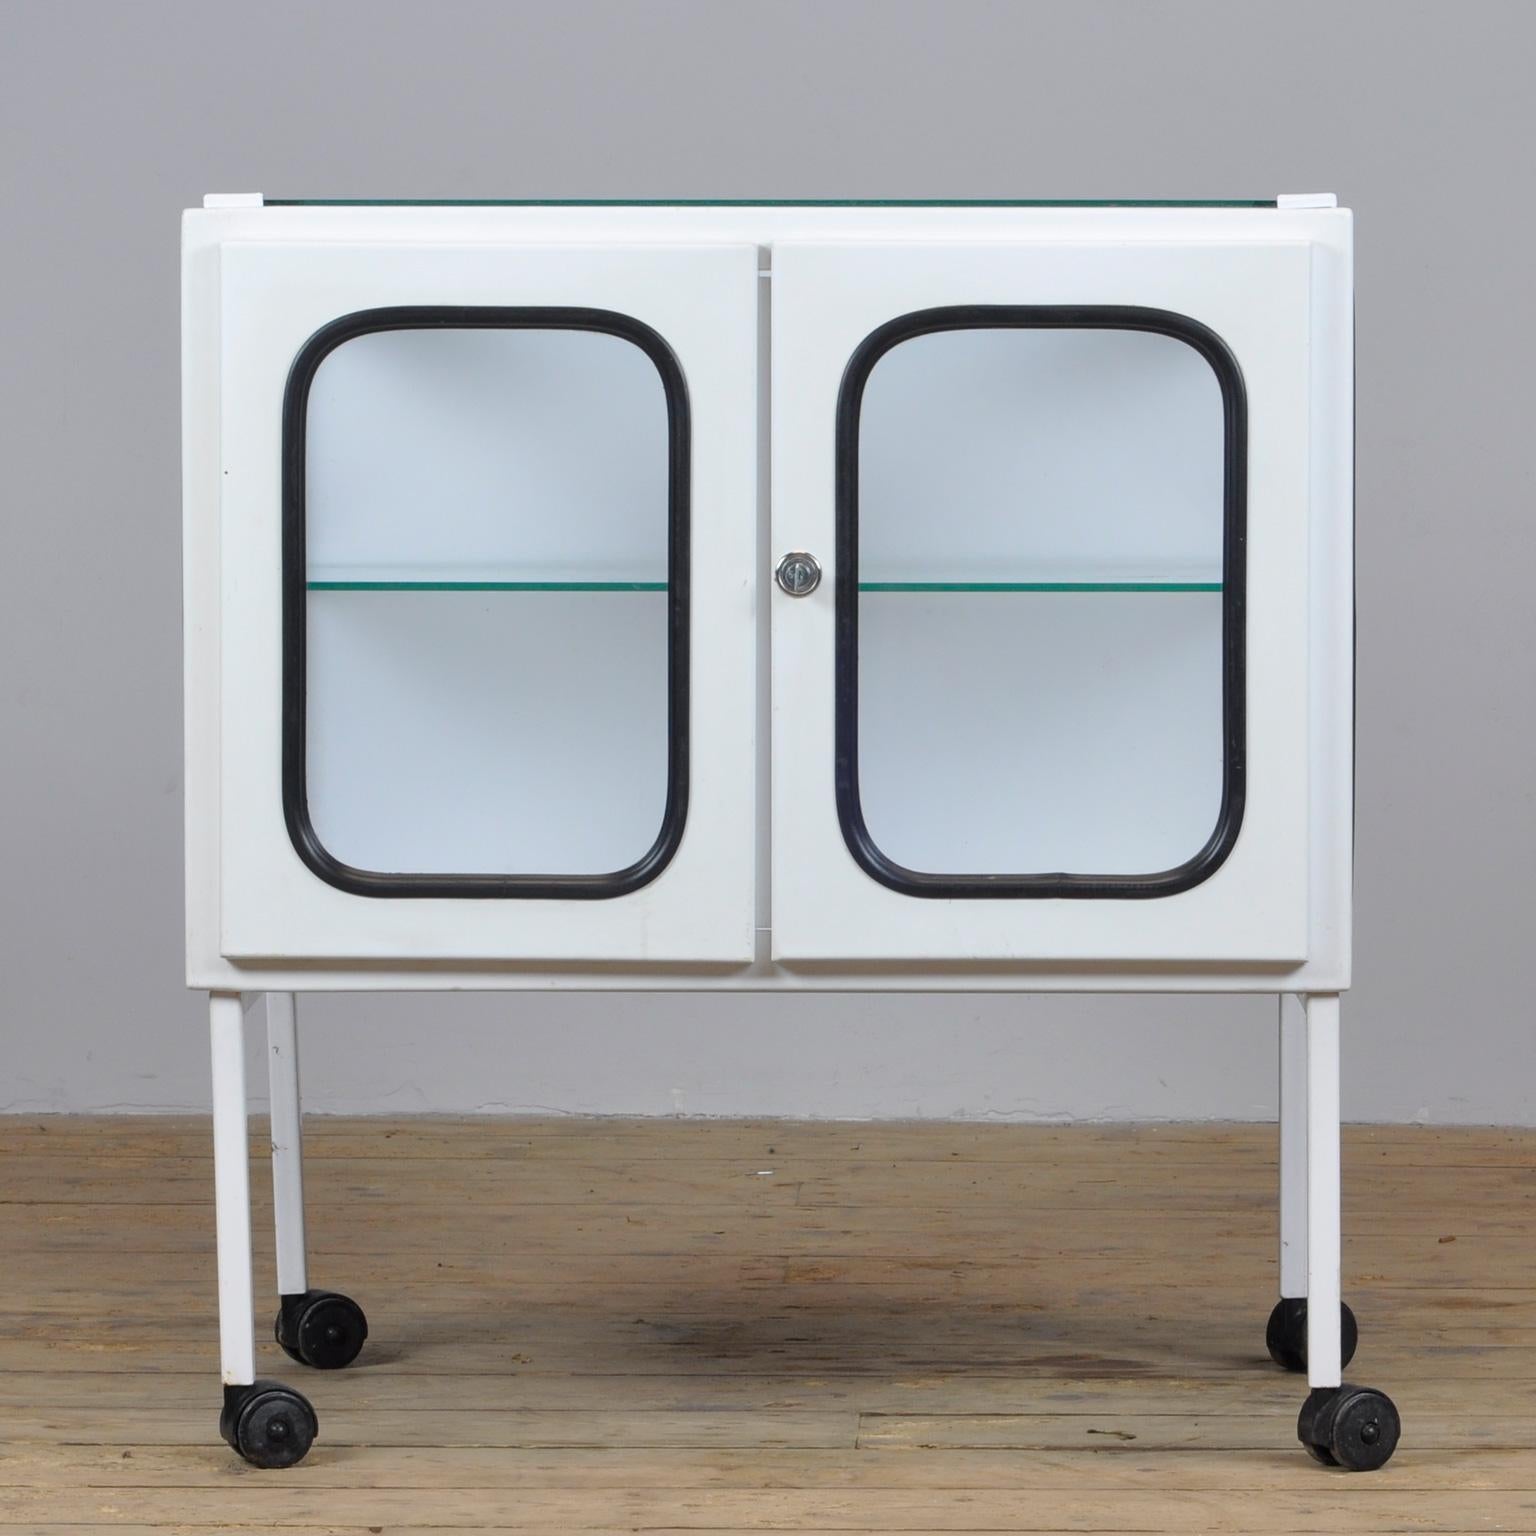 Vintage medical trolley in good condition. Made of steel and glass that is clamped in the steel by a rubber strip. The cabinet is from the 1970s and is produced in Hungary.